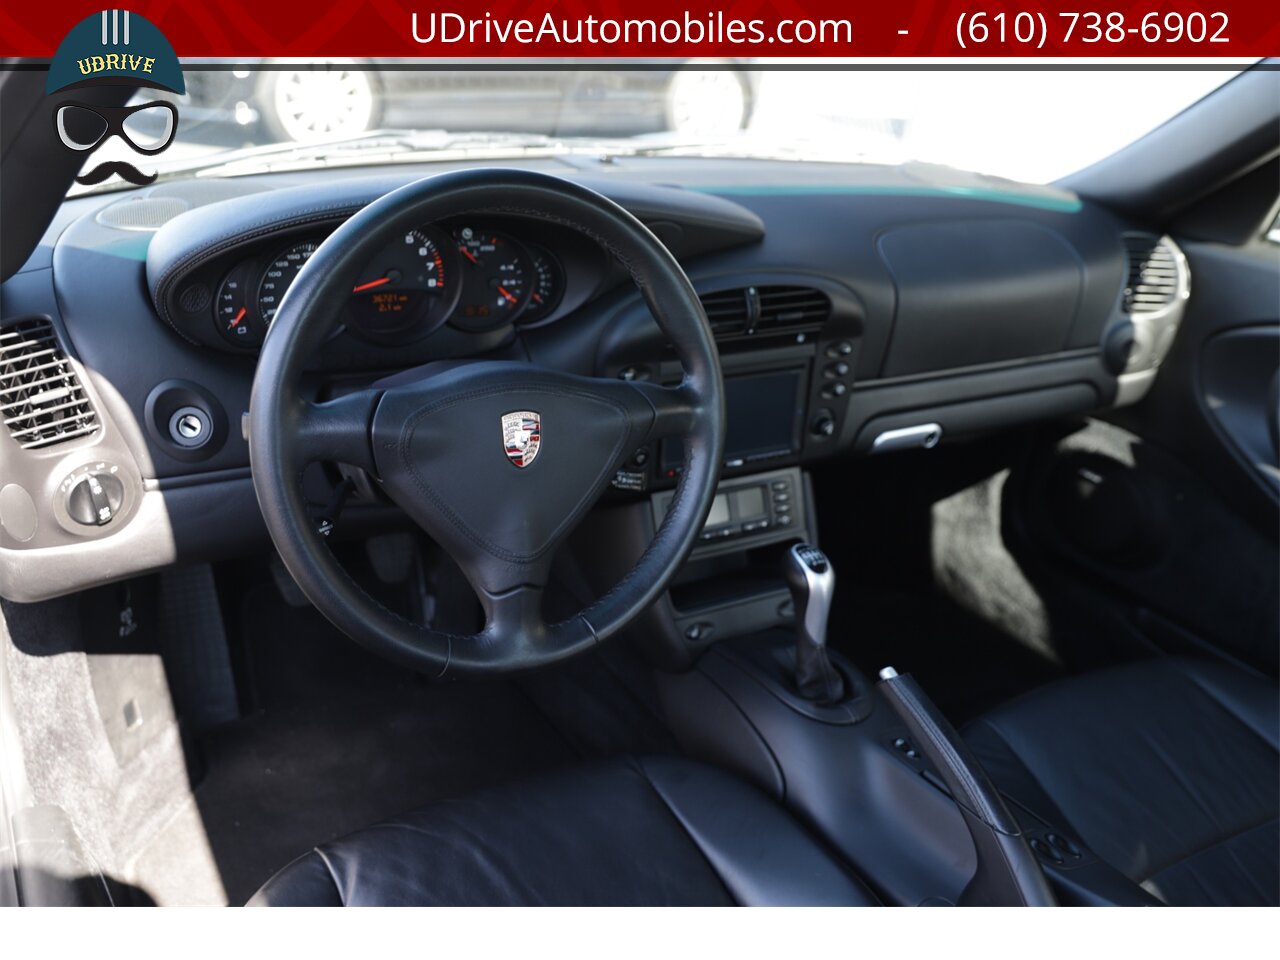 2003 Porsche 911 996 Turbo X50 Power Kit 6 Speed Seal Grey  over Black Leather - Photo 29 - West Chester, PA 19382